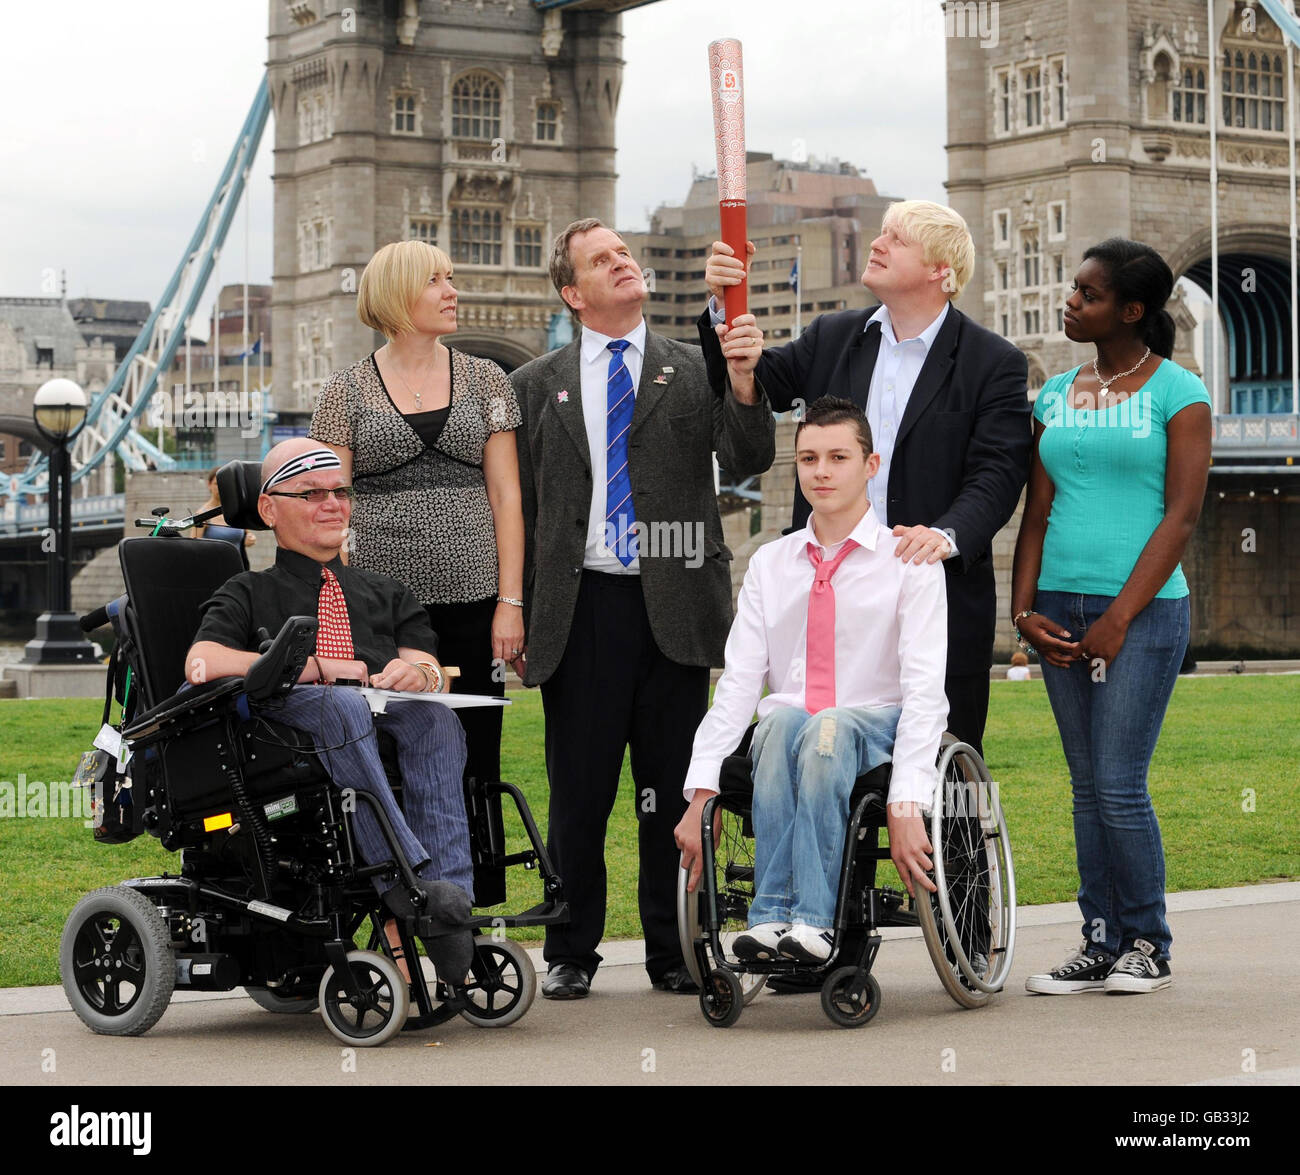 (left to right) GLA disabled rights adviser, David Morris, volunteer Michelle Martin, Chairman of the British Paralympics Association, Mike Brace, Daniel Lucker, who competed in the London Mini Wheelchair Marathon, Mayor of London Boris Johnson, holding a Beijing 2008 Olympics torch and Dominique Alexander-Ellis, a judo competitor, at Tower Bridge, central London, today. Stock Photo